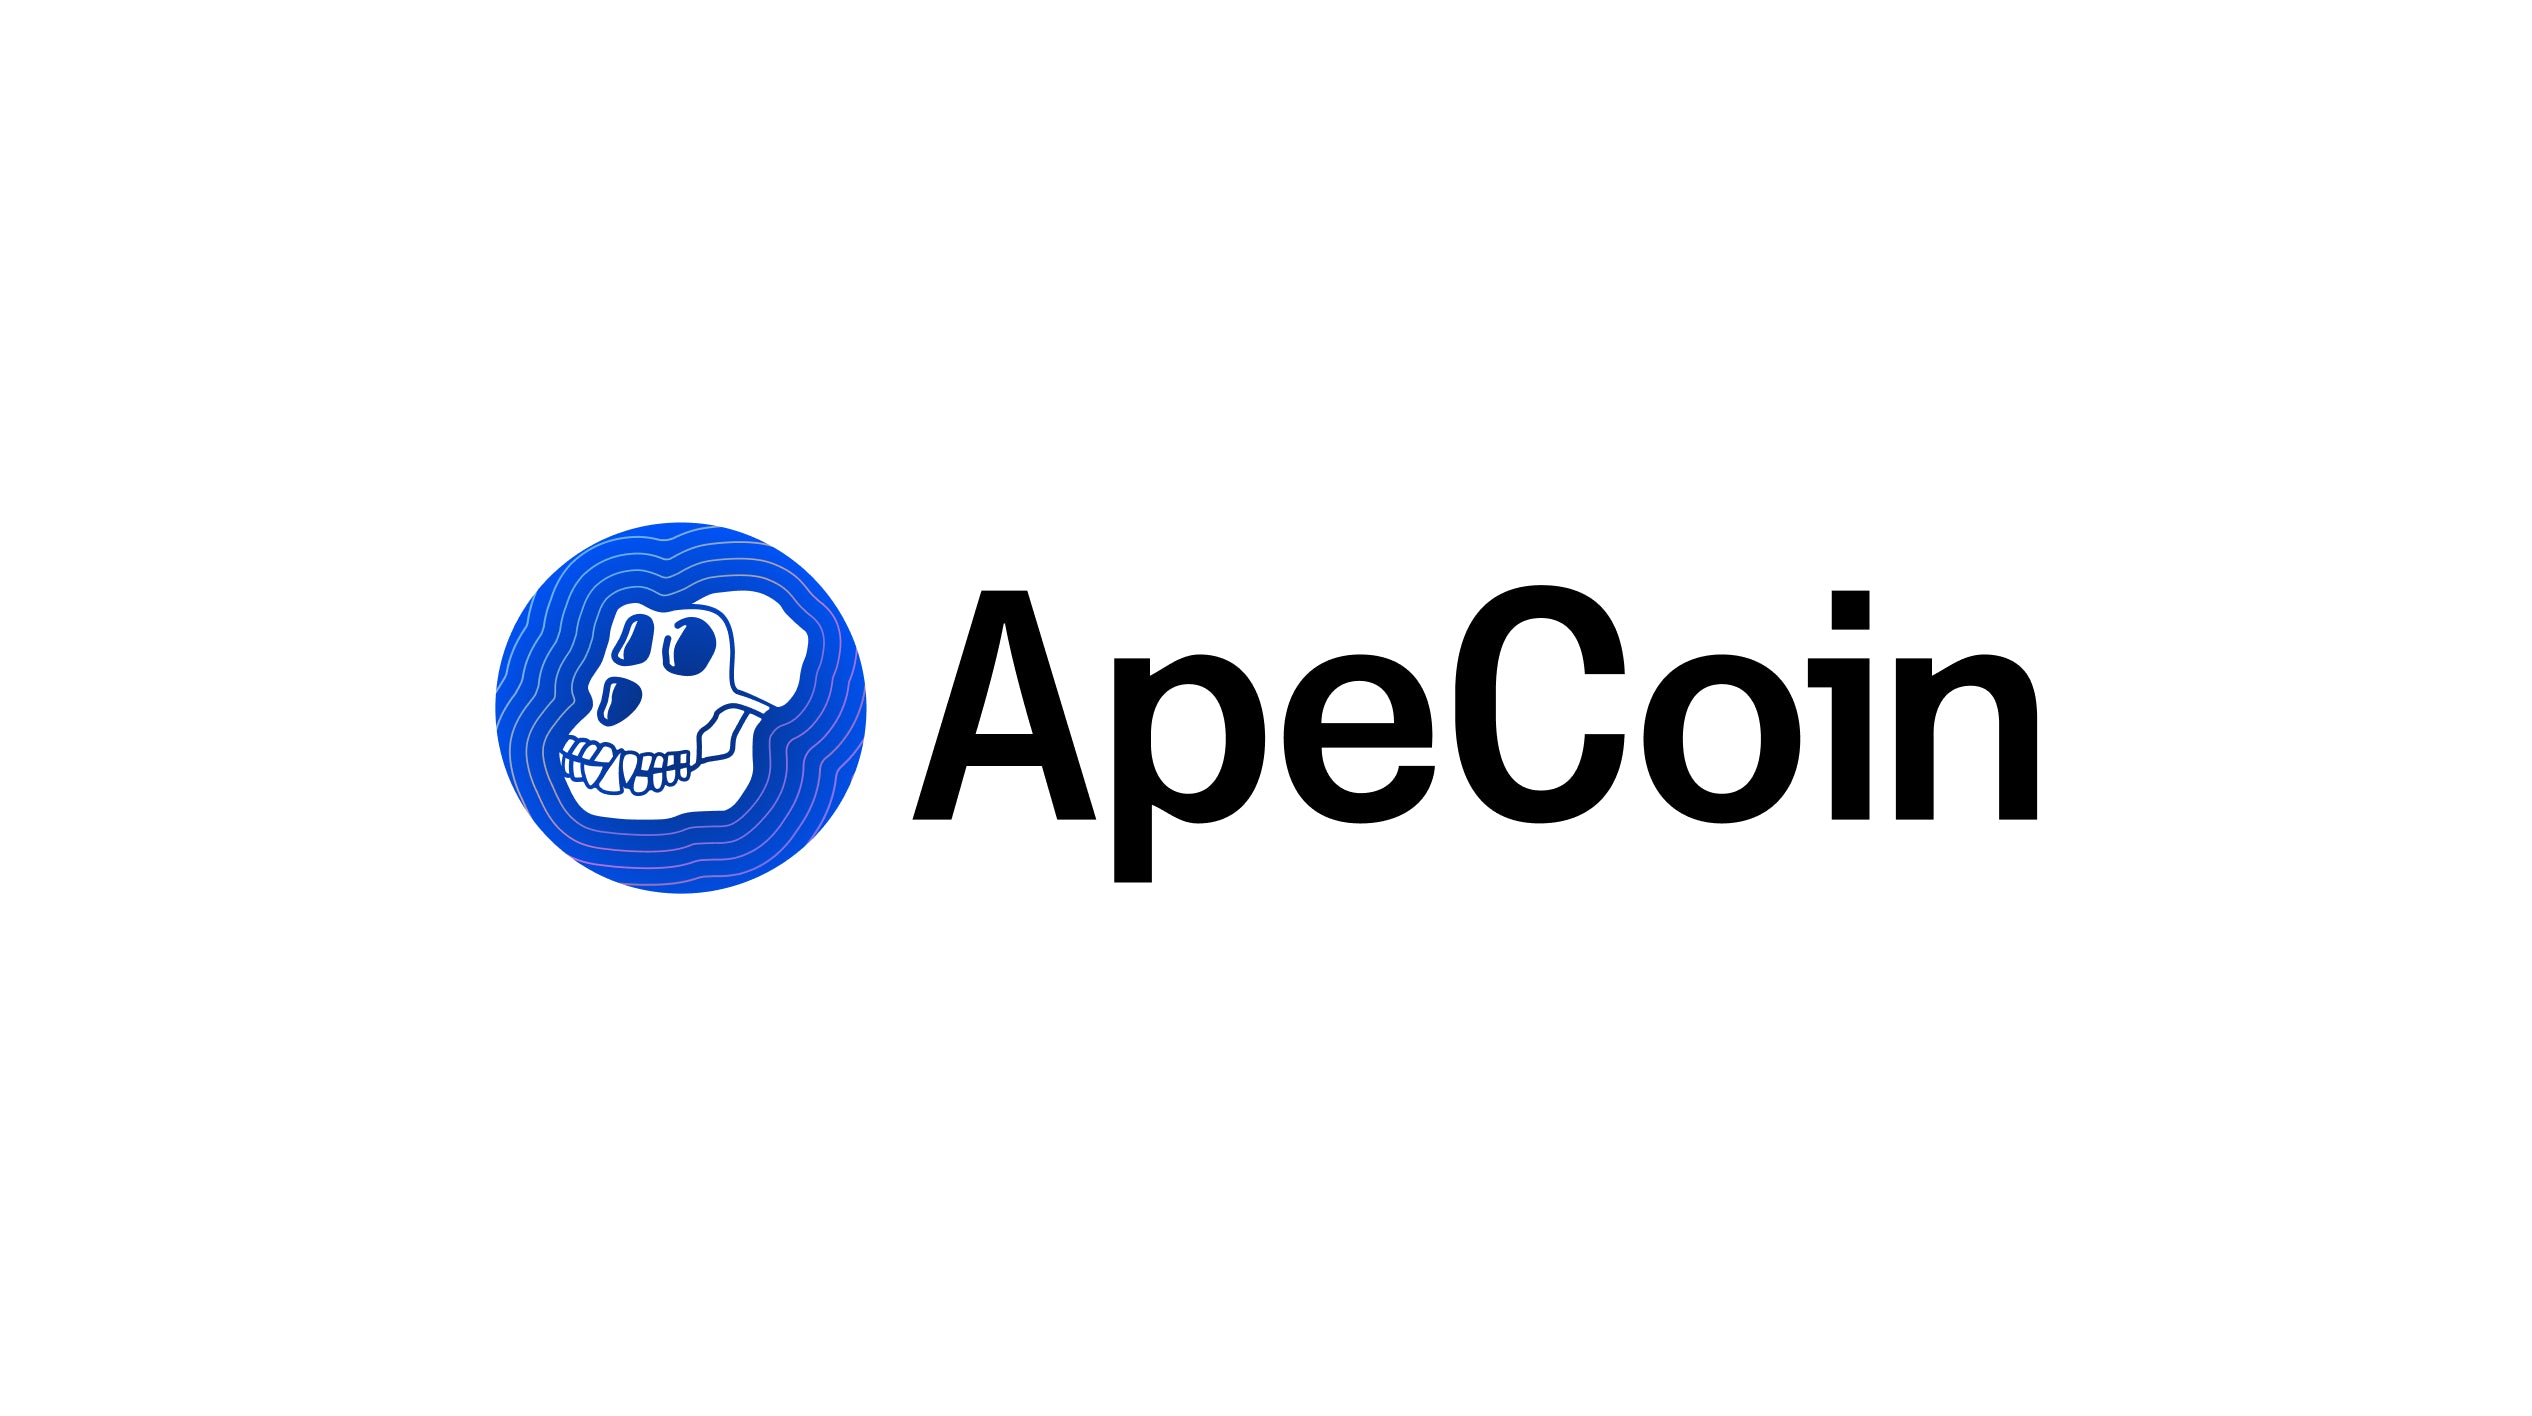 About $APE and the ApeCoinDAO